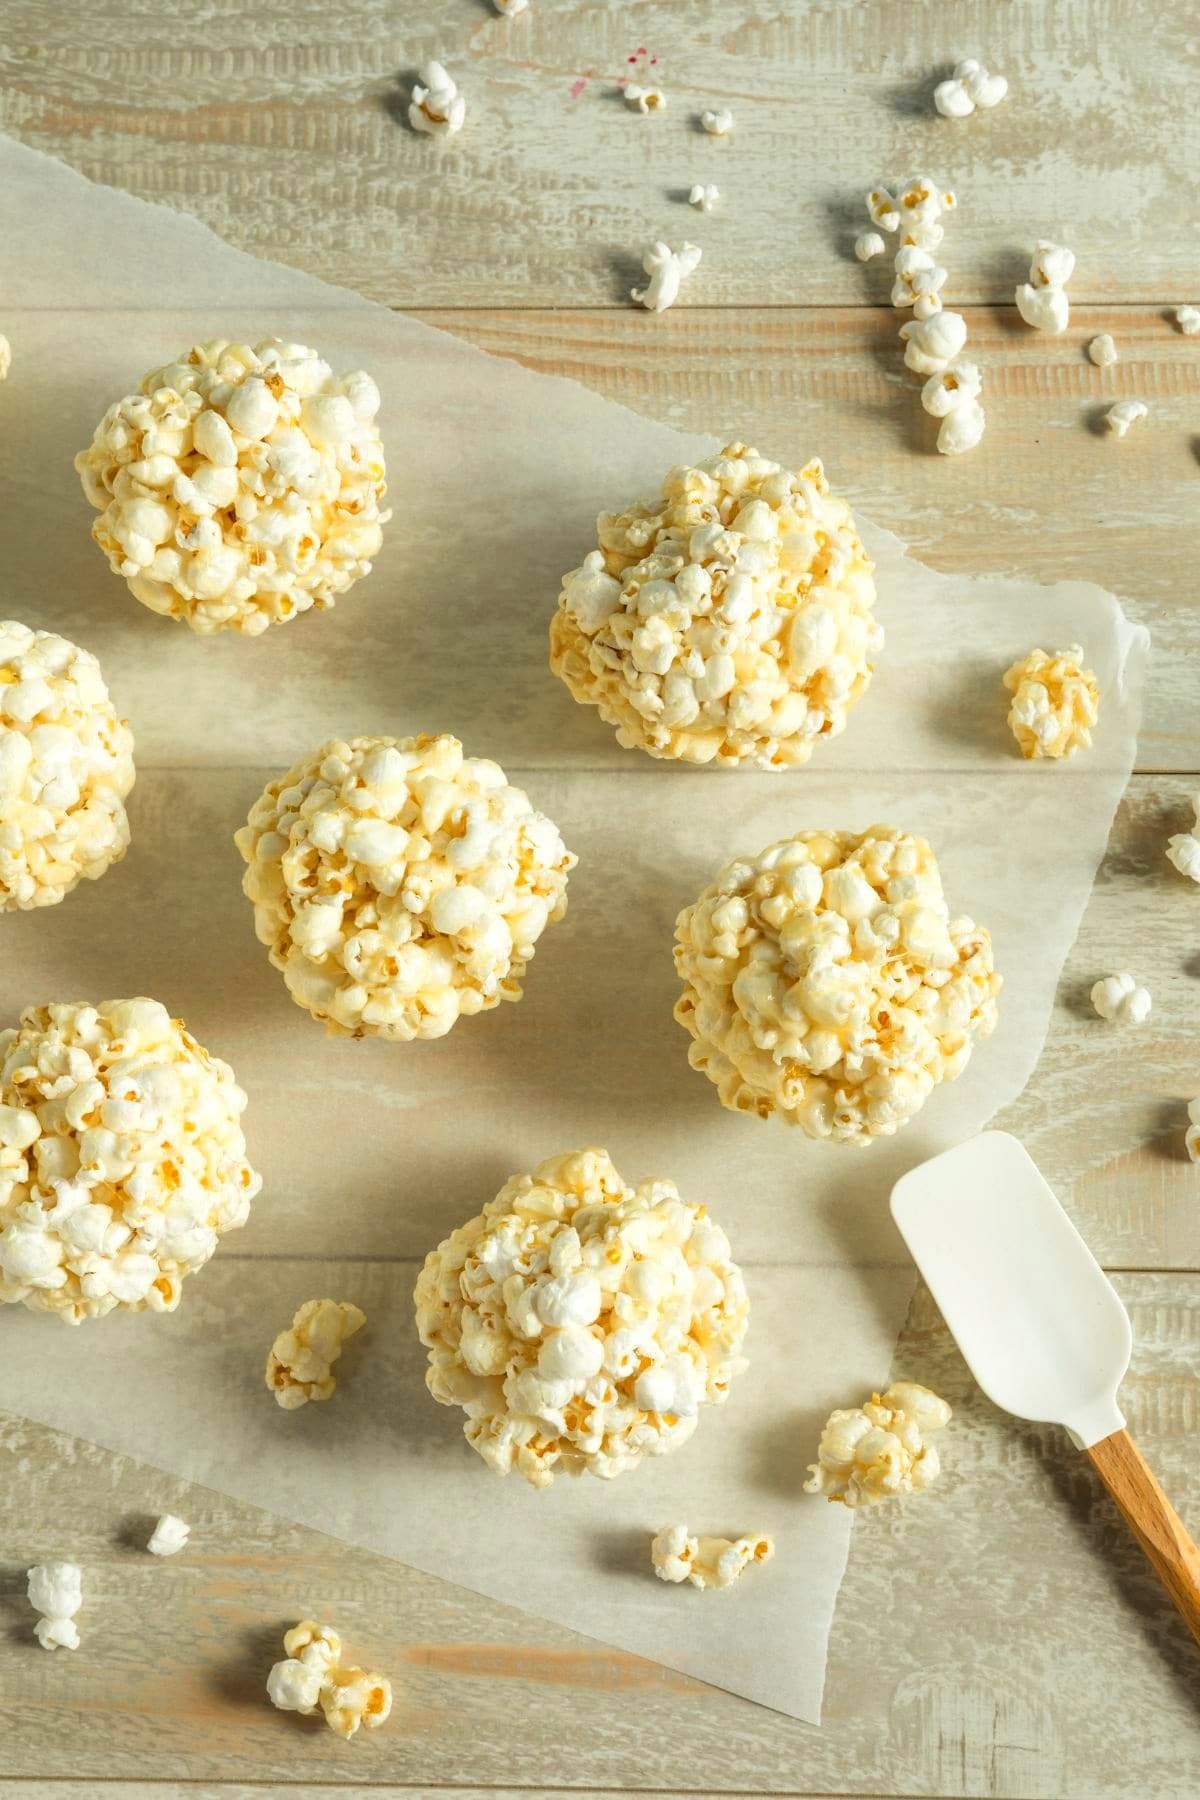 Popcorn balls laid on a parchment paper on top of a wooden table.